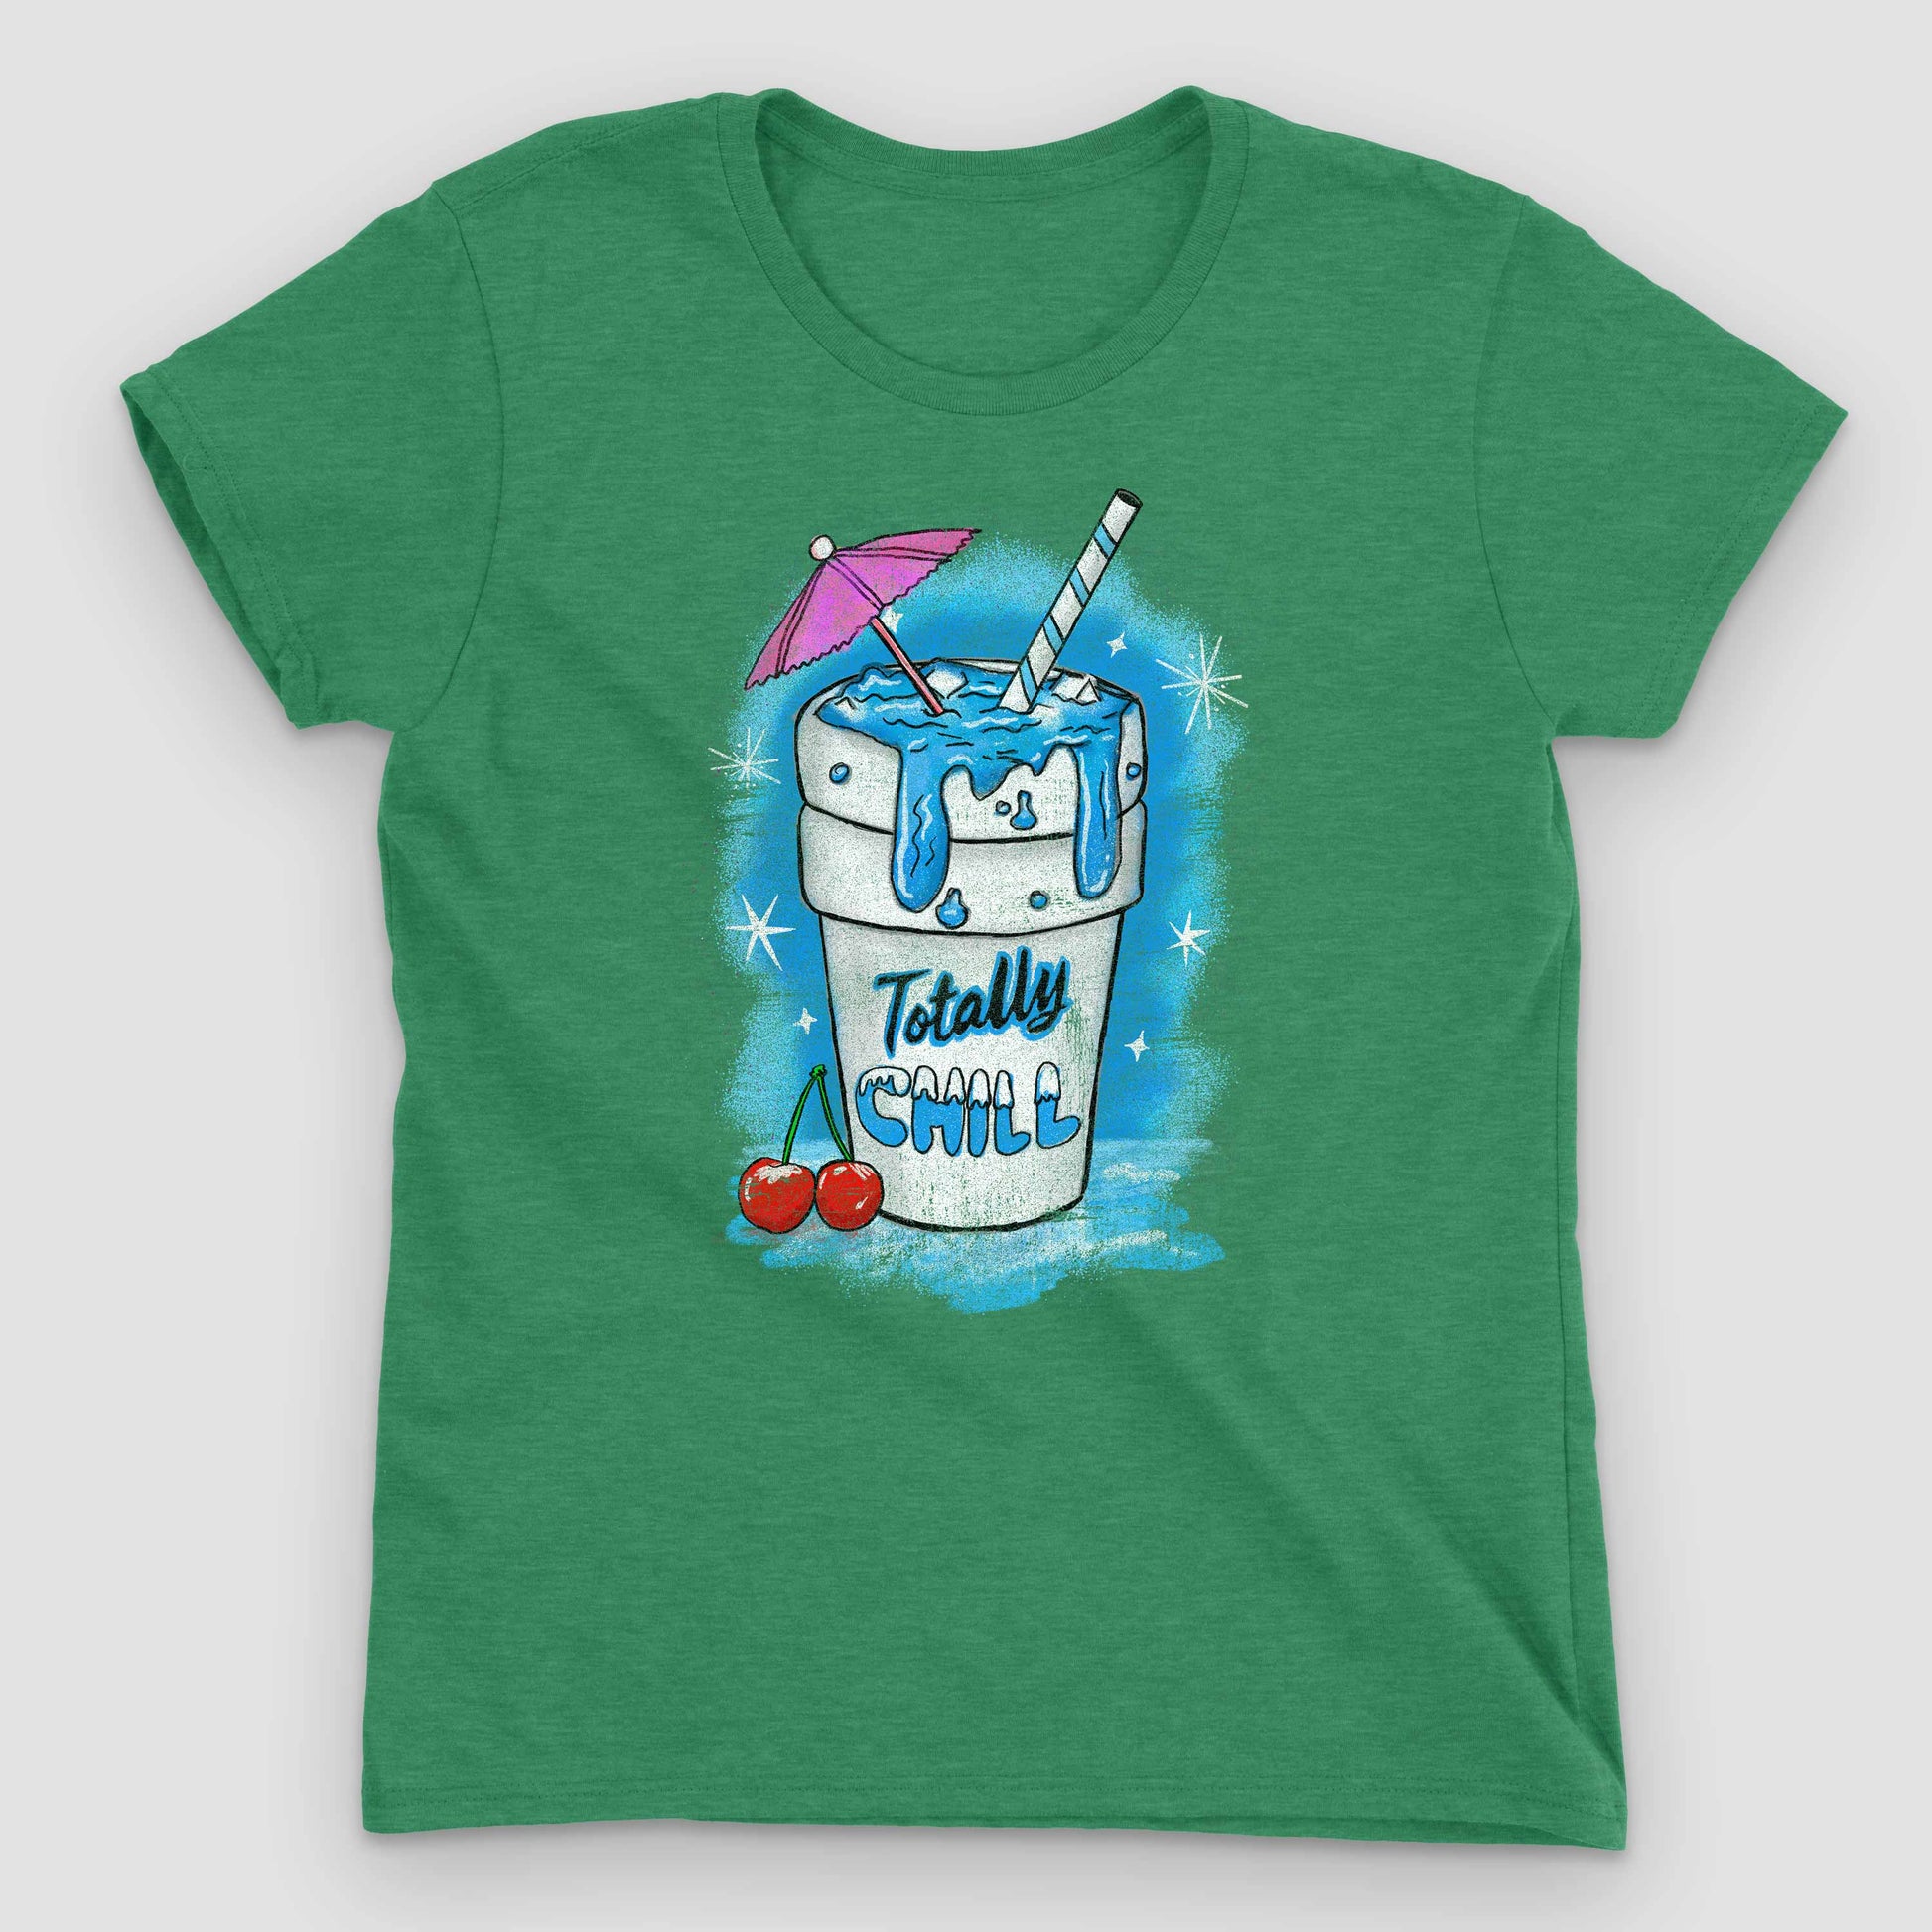 Heather Green Totally Chill Women's Graphic T-Shirt by Snaxtime